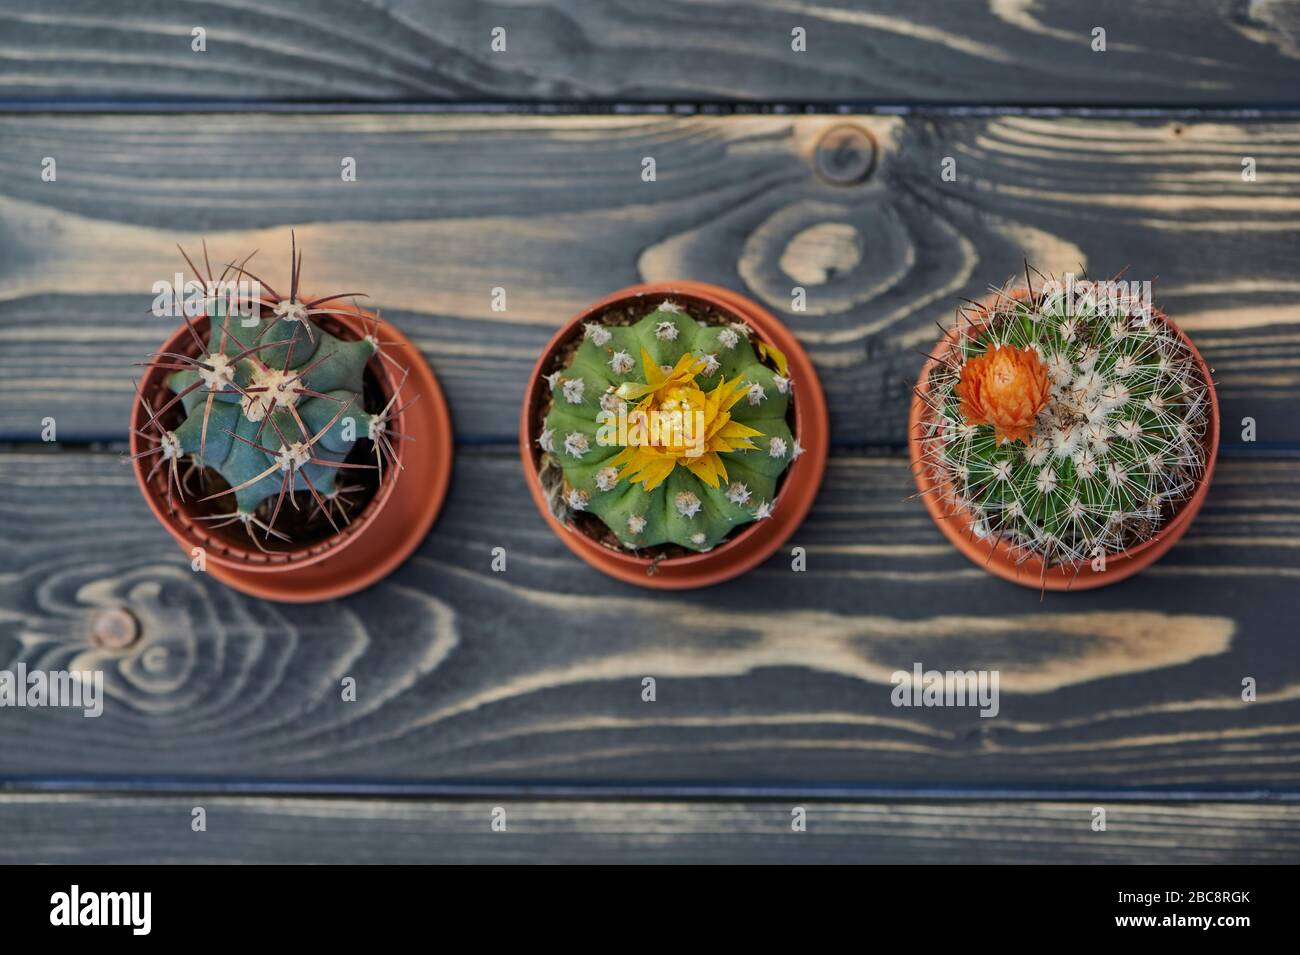 close up of three cacti on wooden table, view from above Stock Photo